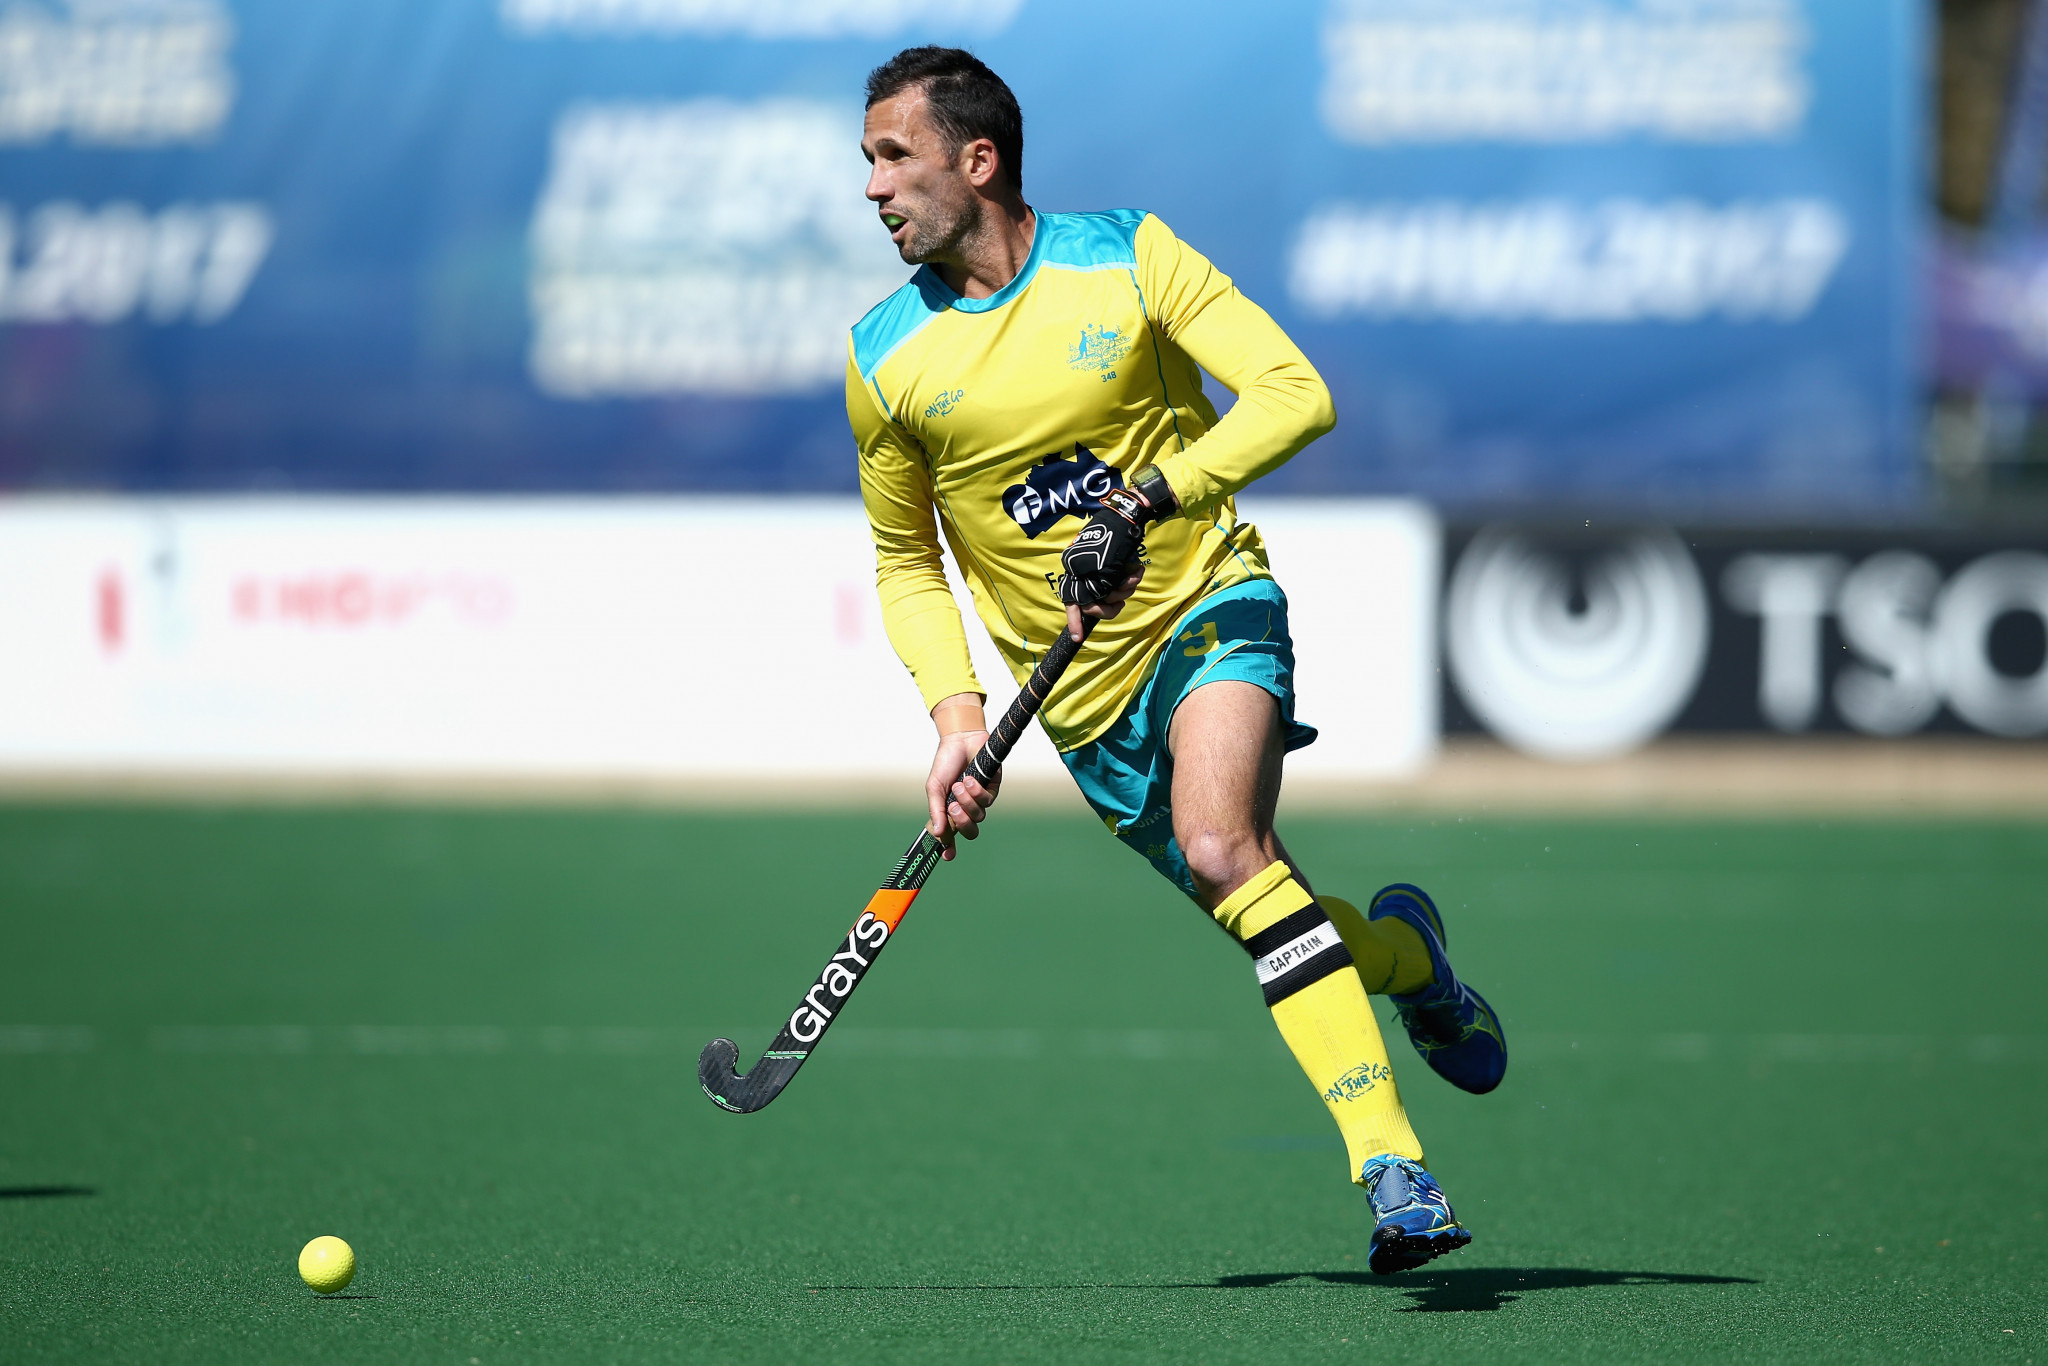 Olympic hockey gold medallist Knowles to carry Australian flag at Gold Coast 2018 Opening Ceremony